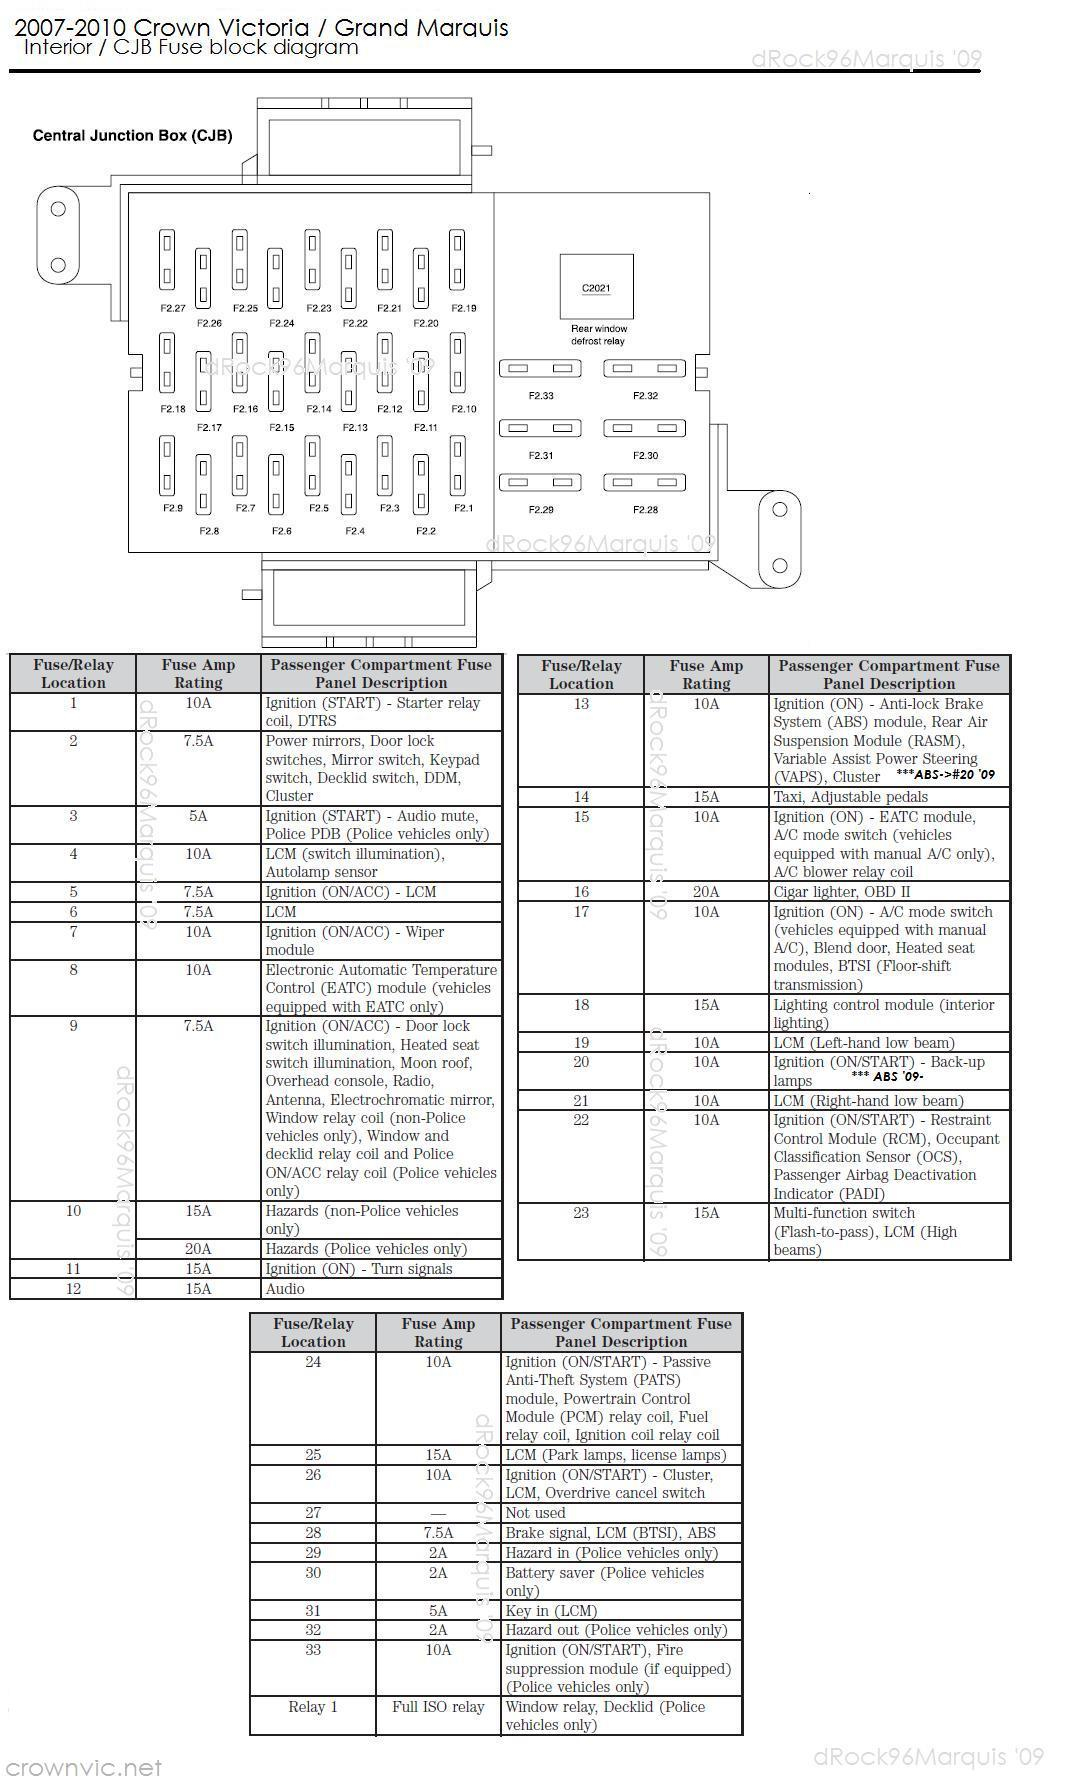 2006 Ford Fusion Fuse Box Diagram 2006 Ford Crown Victoria Fuse Panel Diagram Wiring Diagram Work